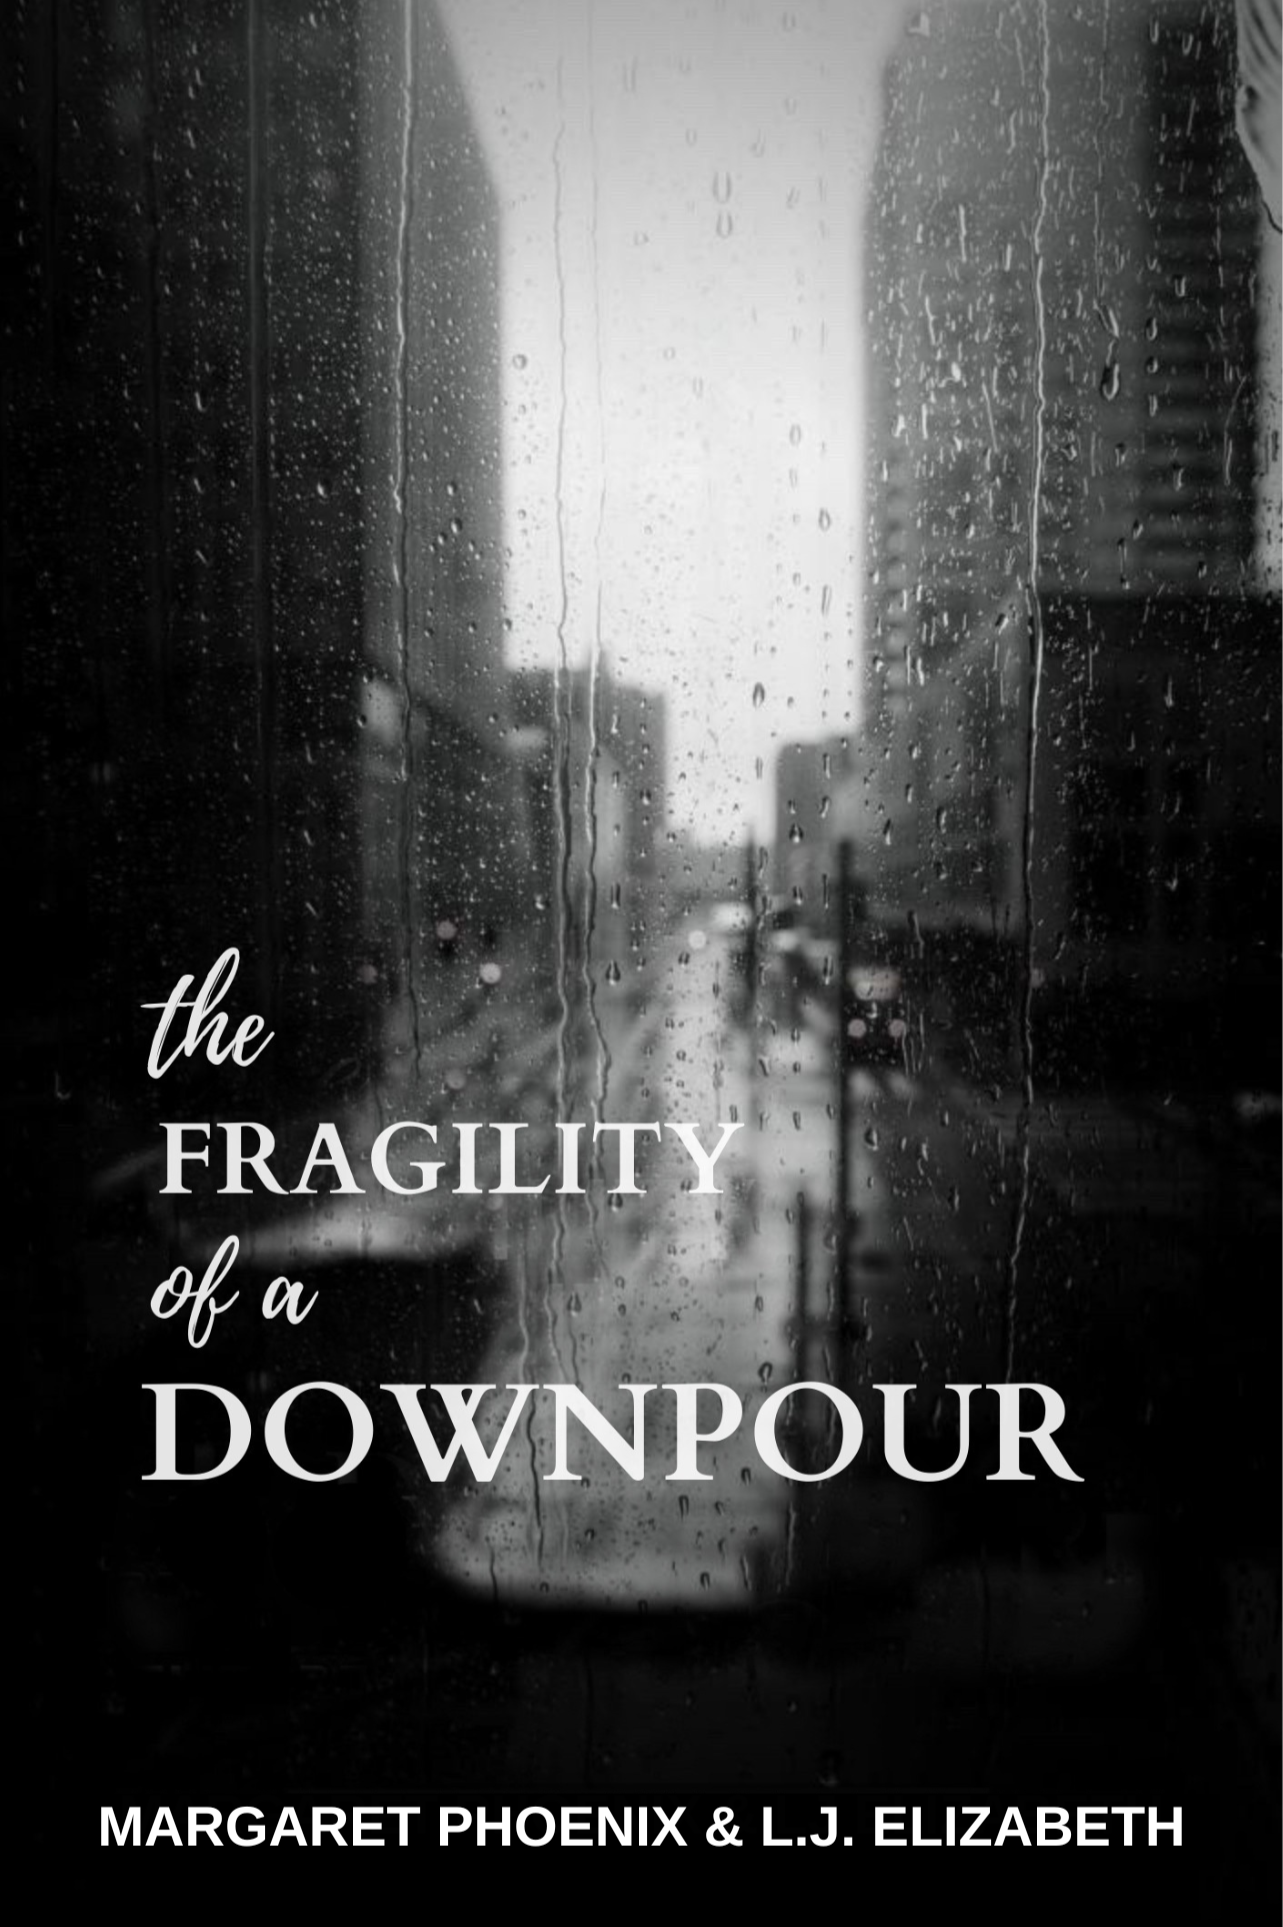 Book cover of The Fragility of a Downpour by L.J. Elizabeth